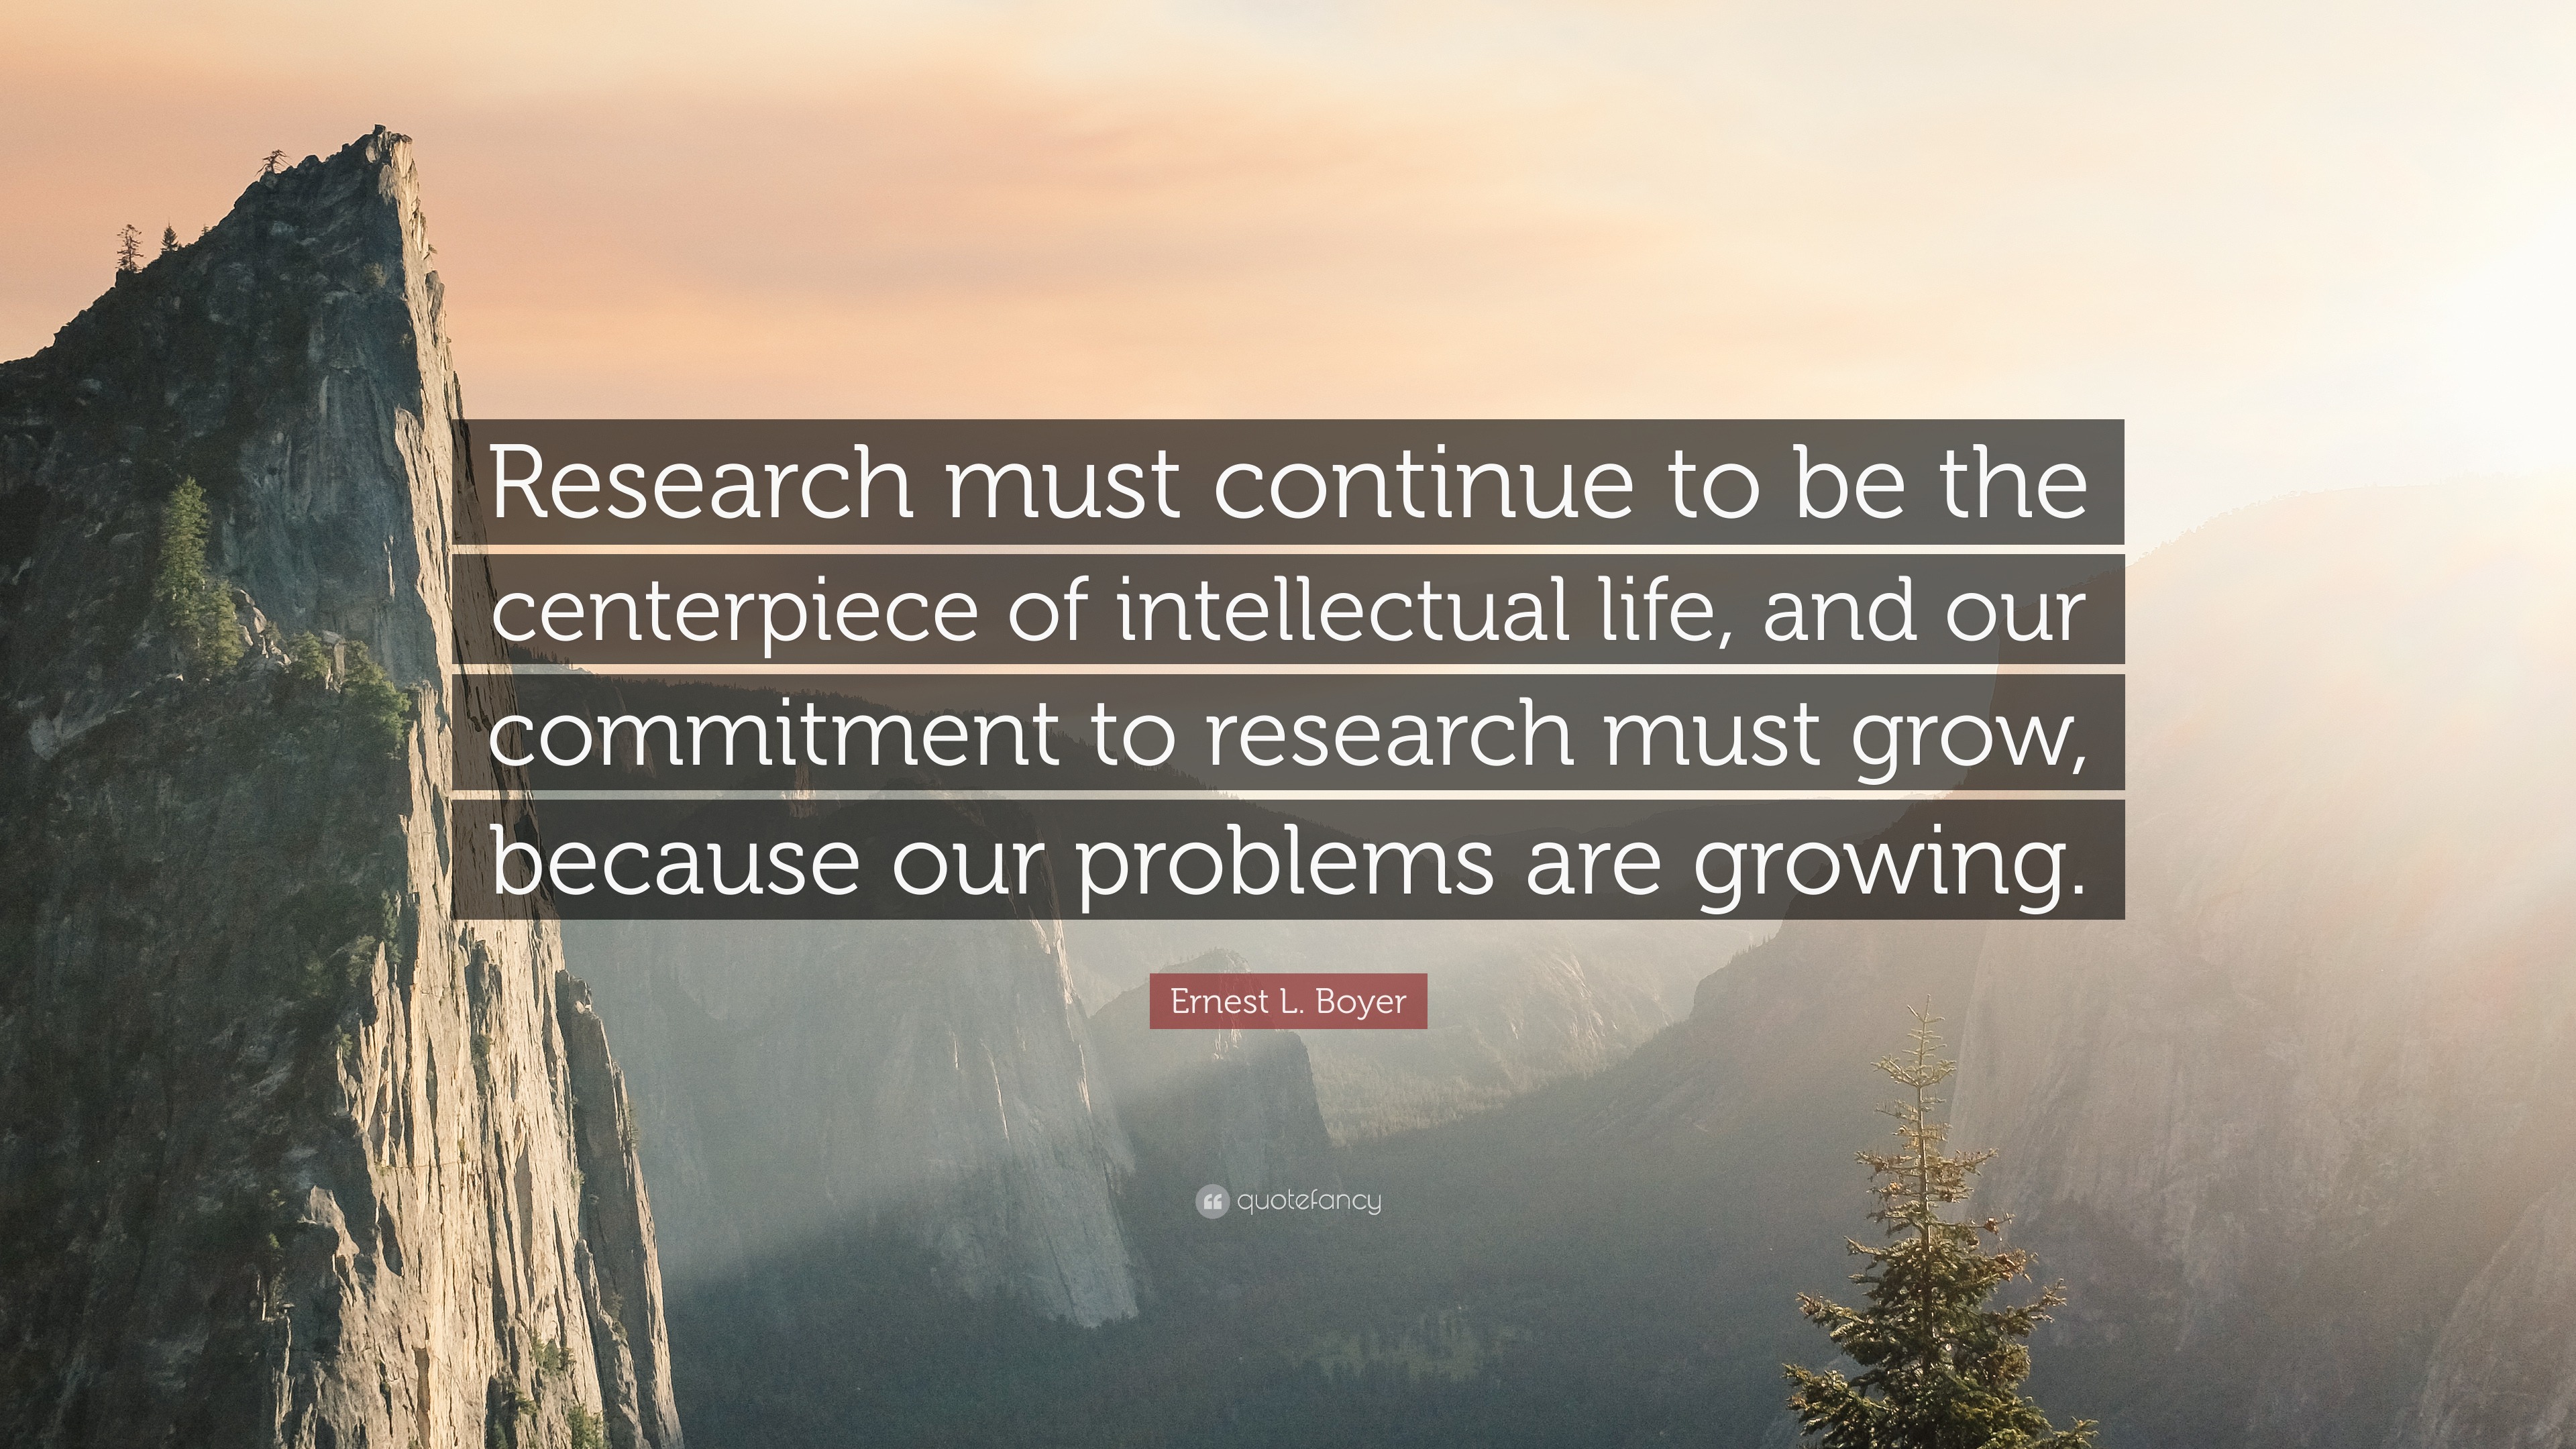 Ernest L. Boyer Quote: “Research must continue to be the centerpiece of